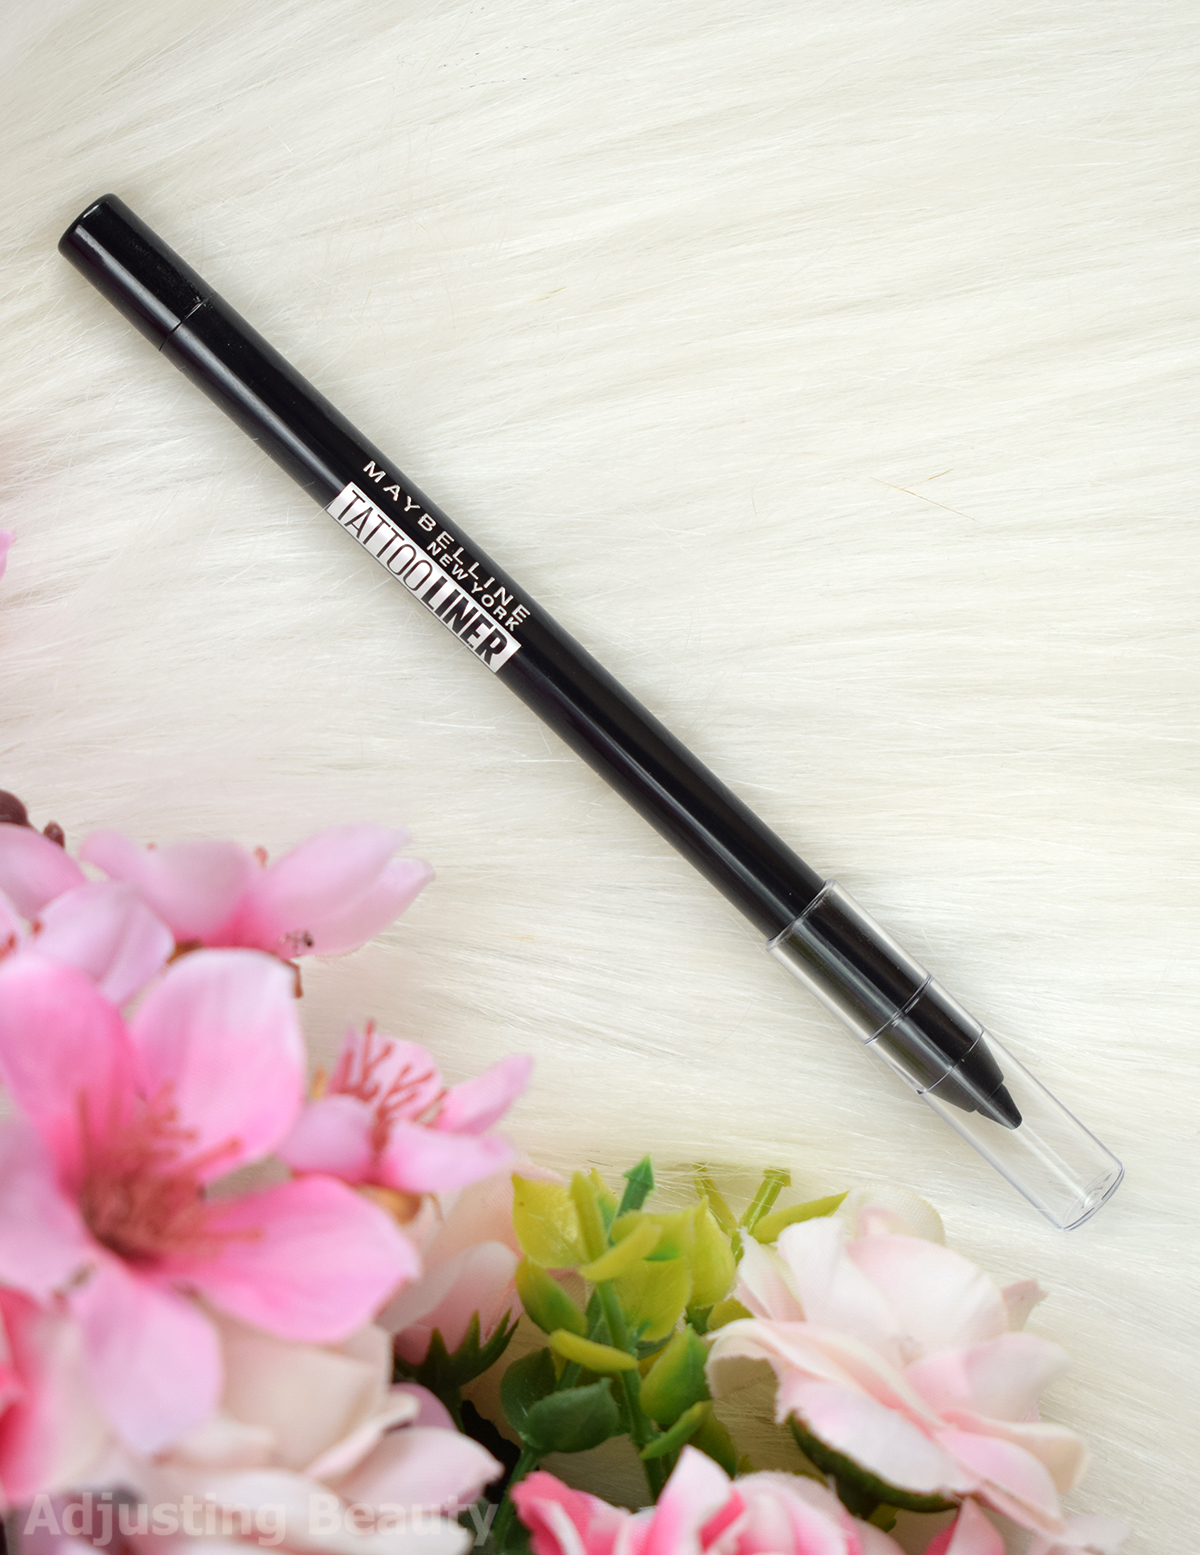 Maybelline Tattoo Liner Gel Pencil Review  Swatches in Onyx